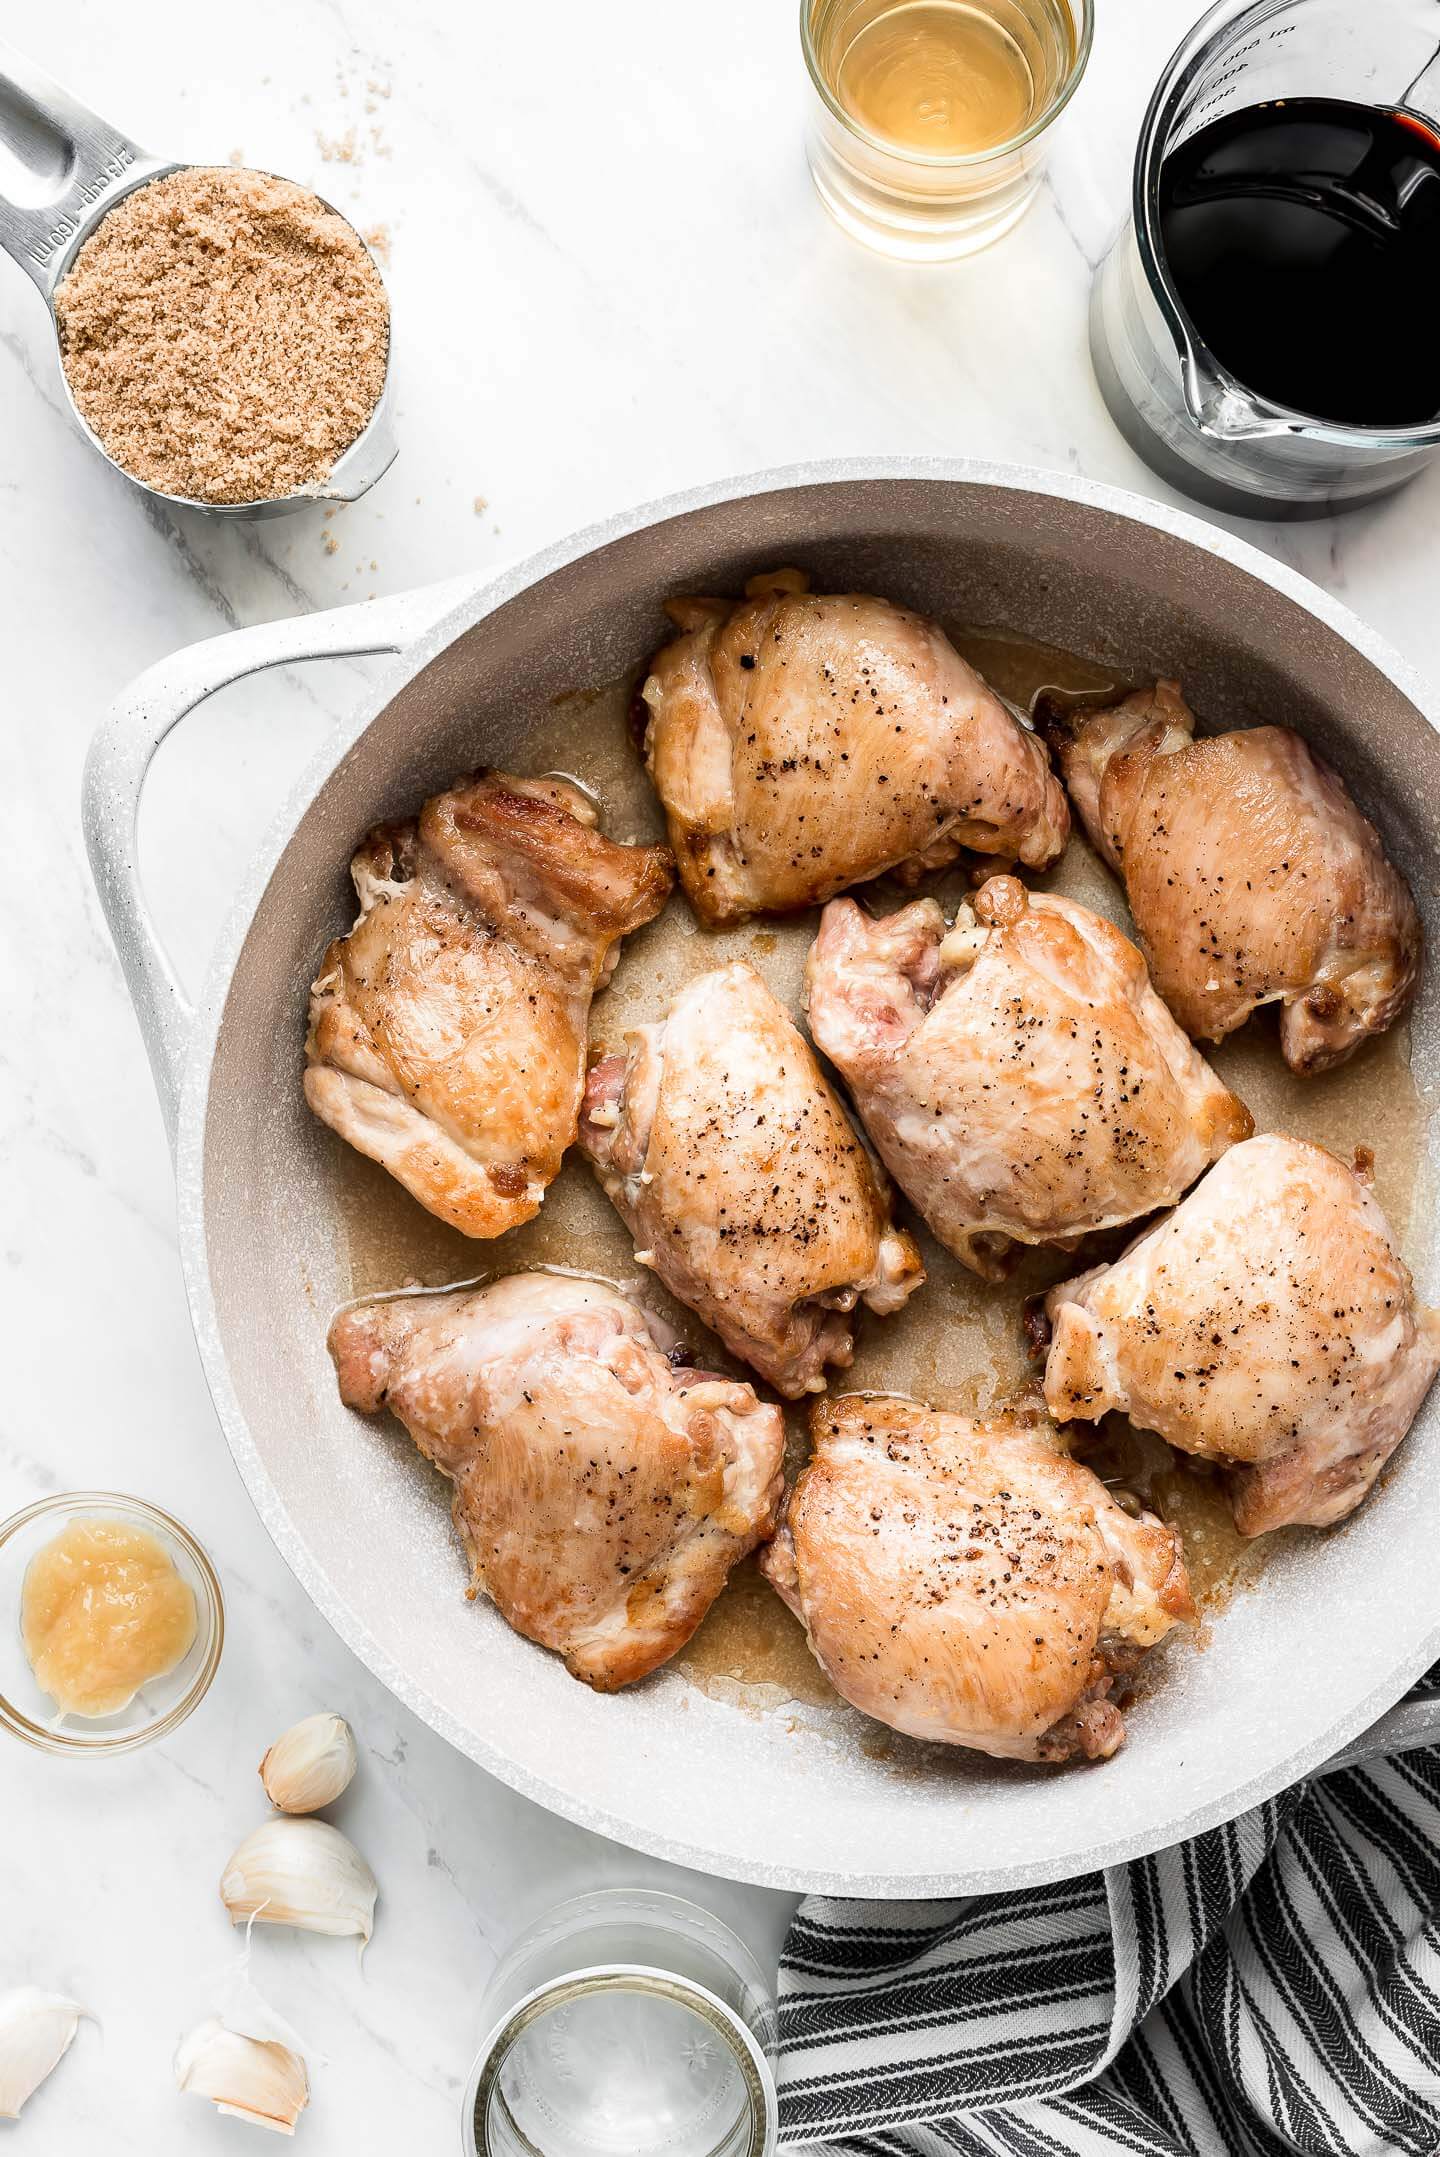 Browned chicken thighs in a skillet seasoned with salt and pepper with various ingredients (brown sugar, soy sauce, vinegar, garlic, and ginger) surrounding.